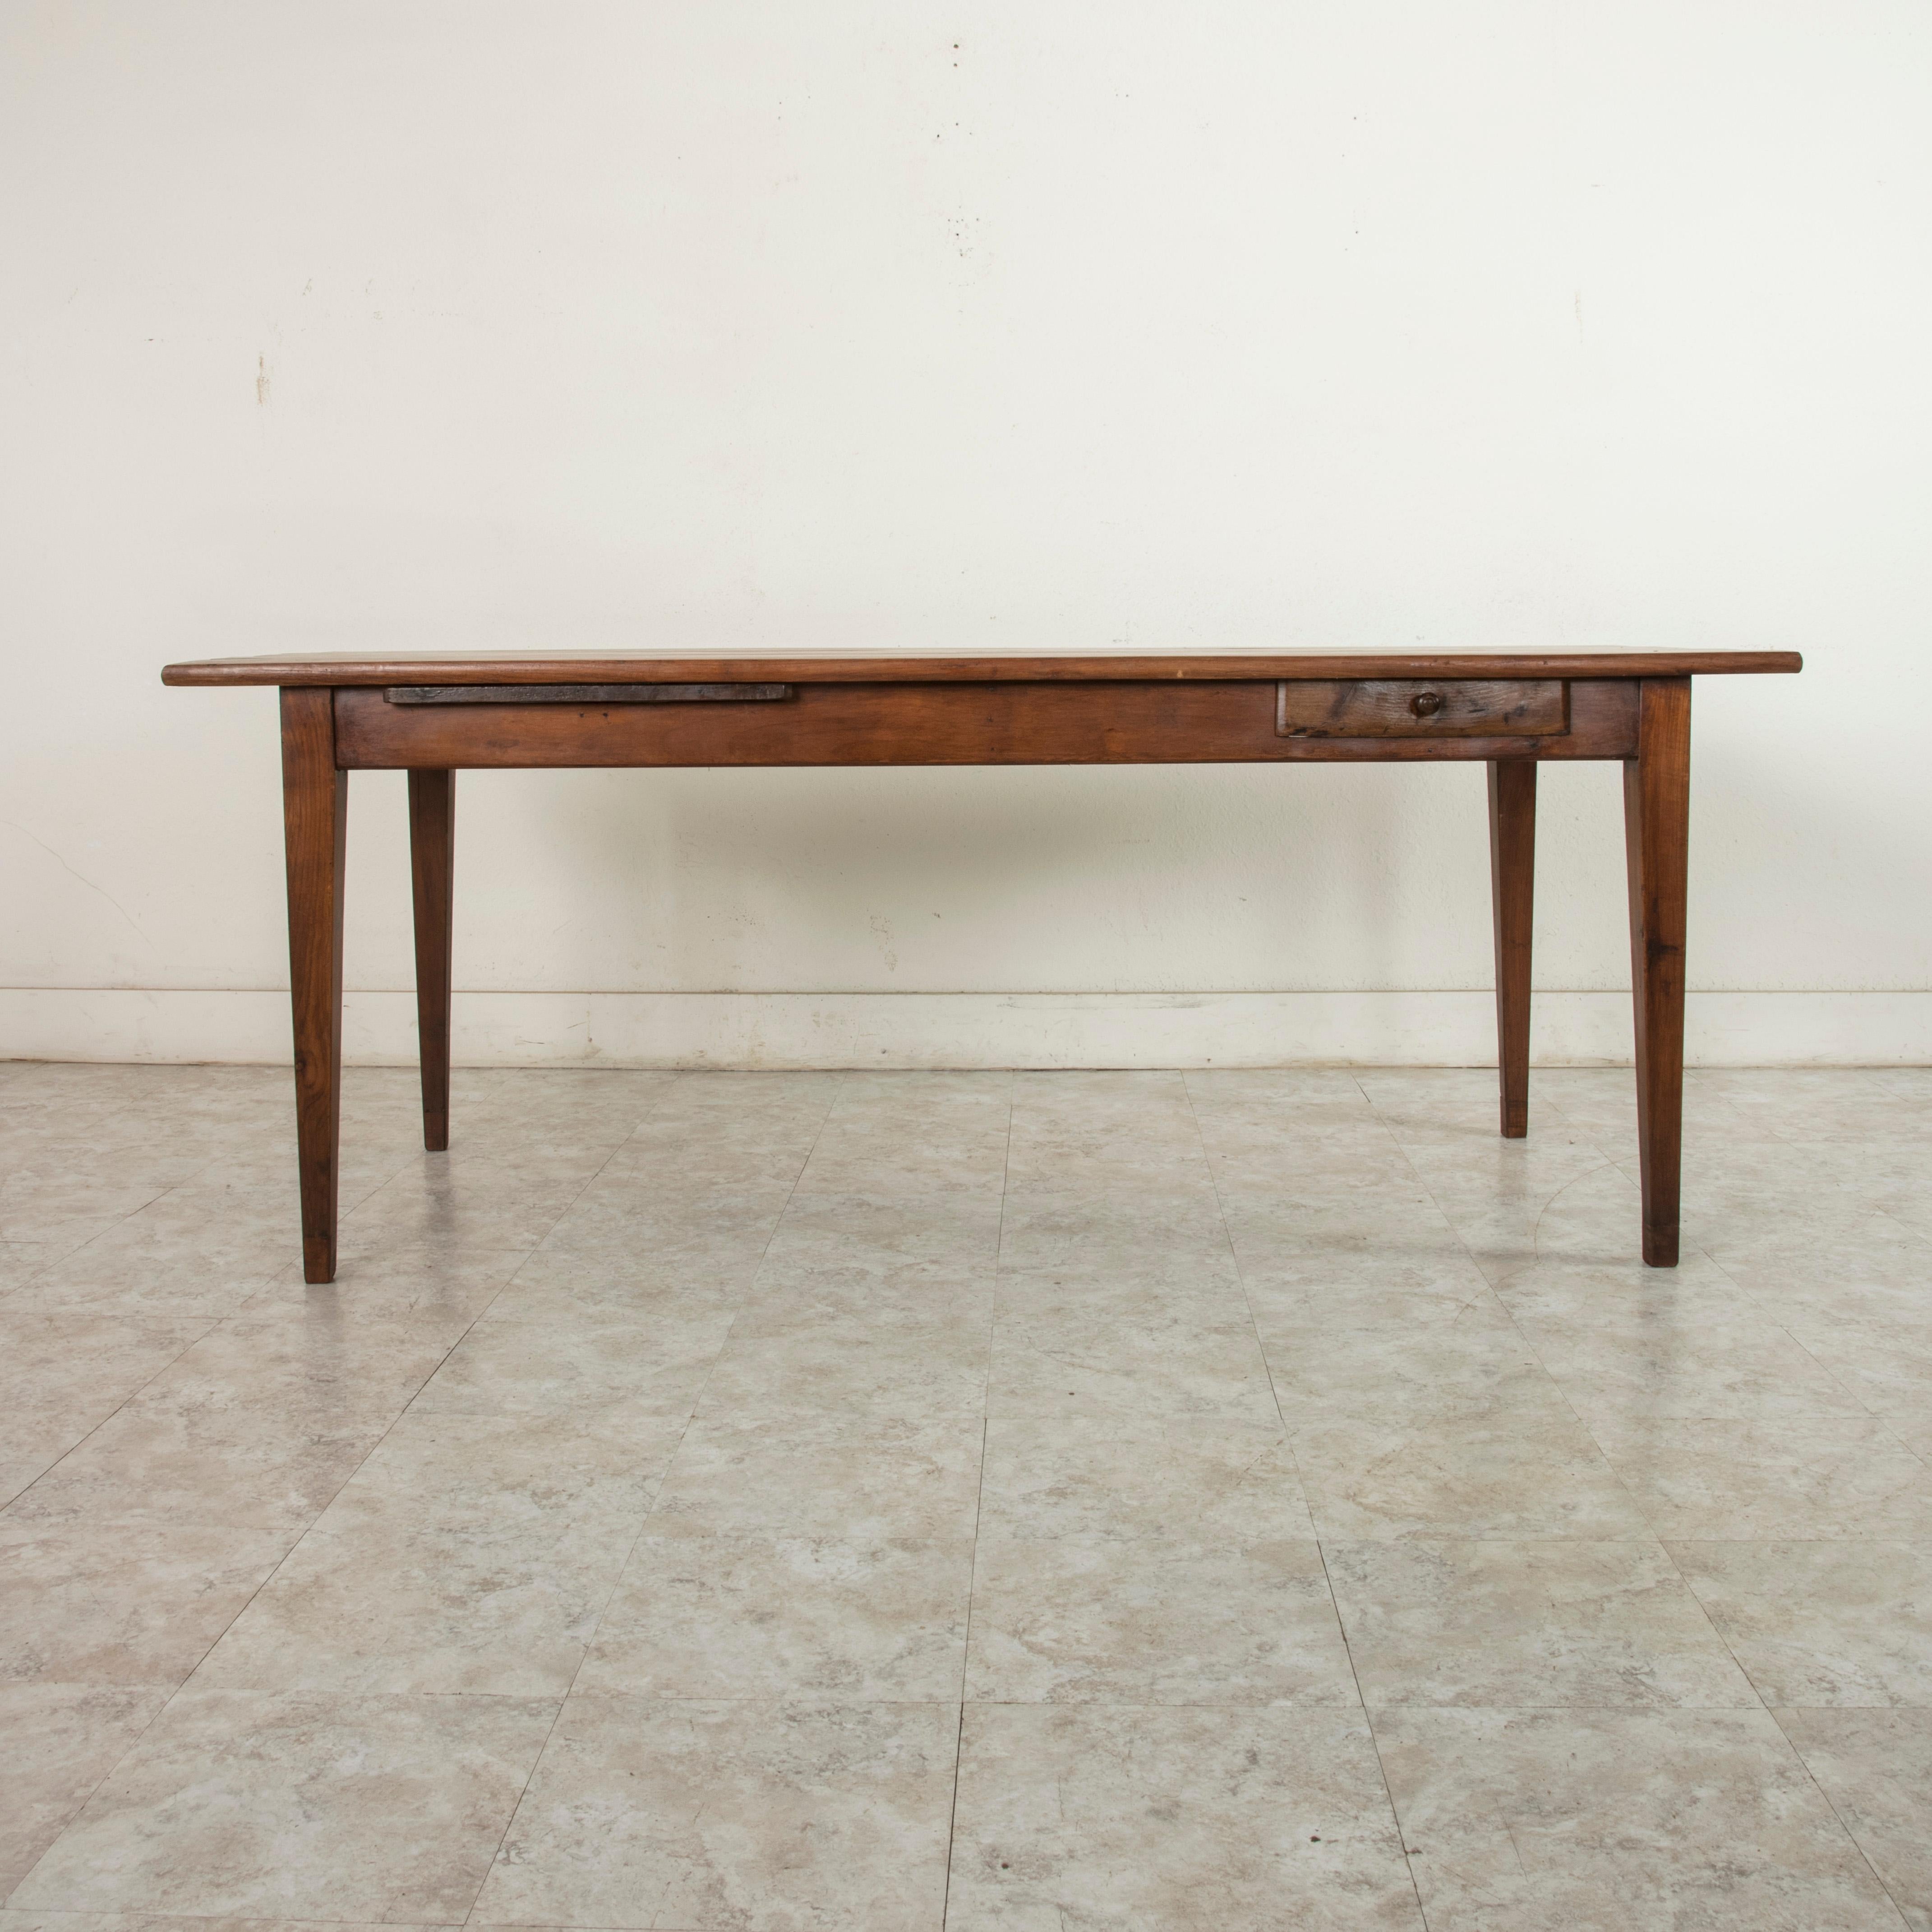 This artisan made farm table from the turn of the 20th century is from the region of Le Perche, a Sub-region of Normandy, France. Its cherrywood top measures 78.5 inches long and 32 inches wide. Resting on a cherrywood base of mortise and tenon